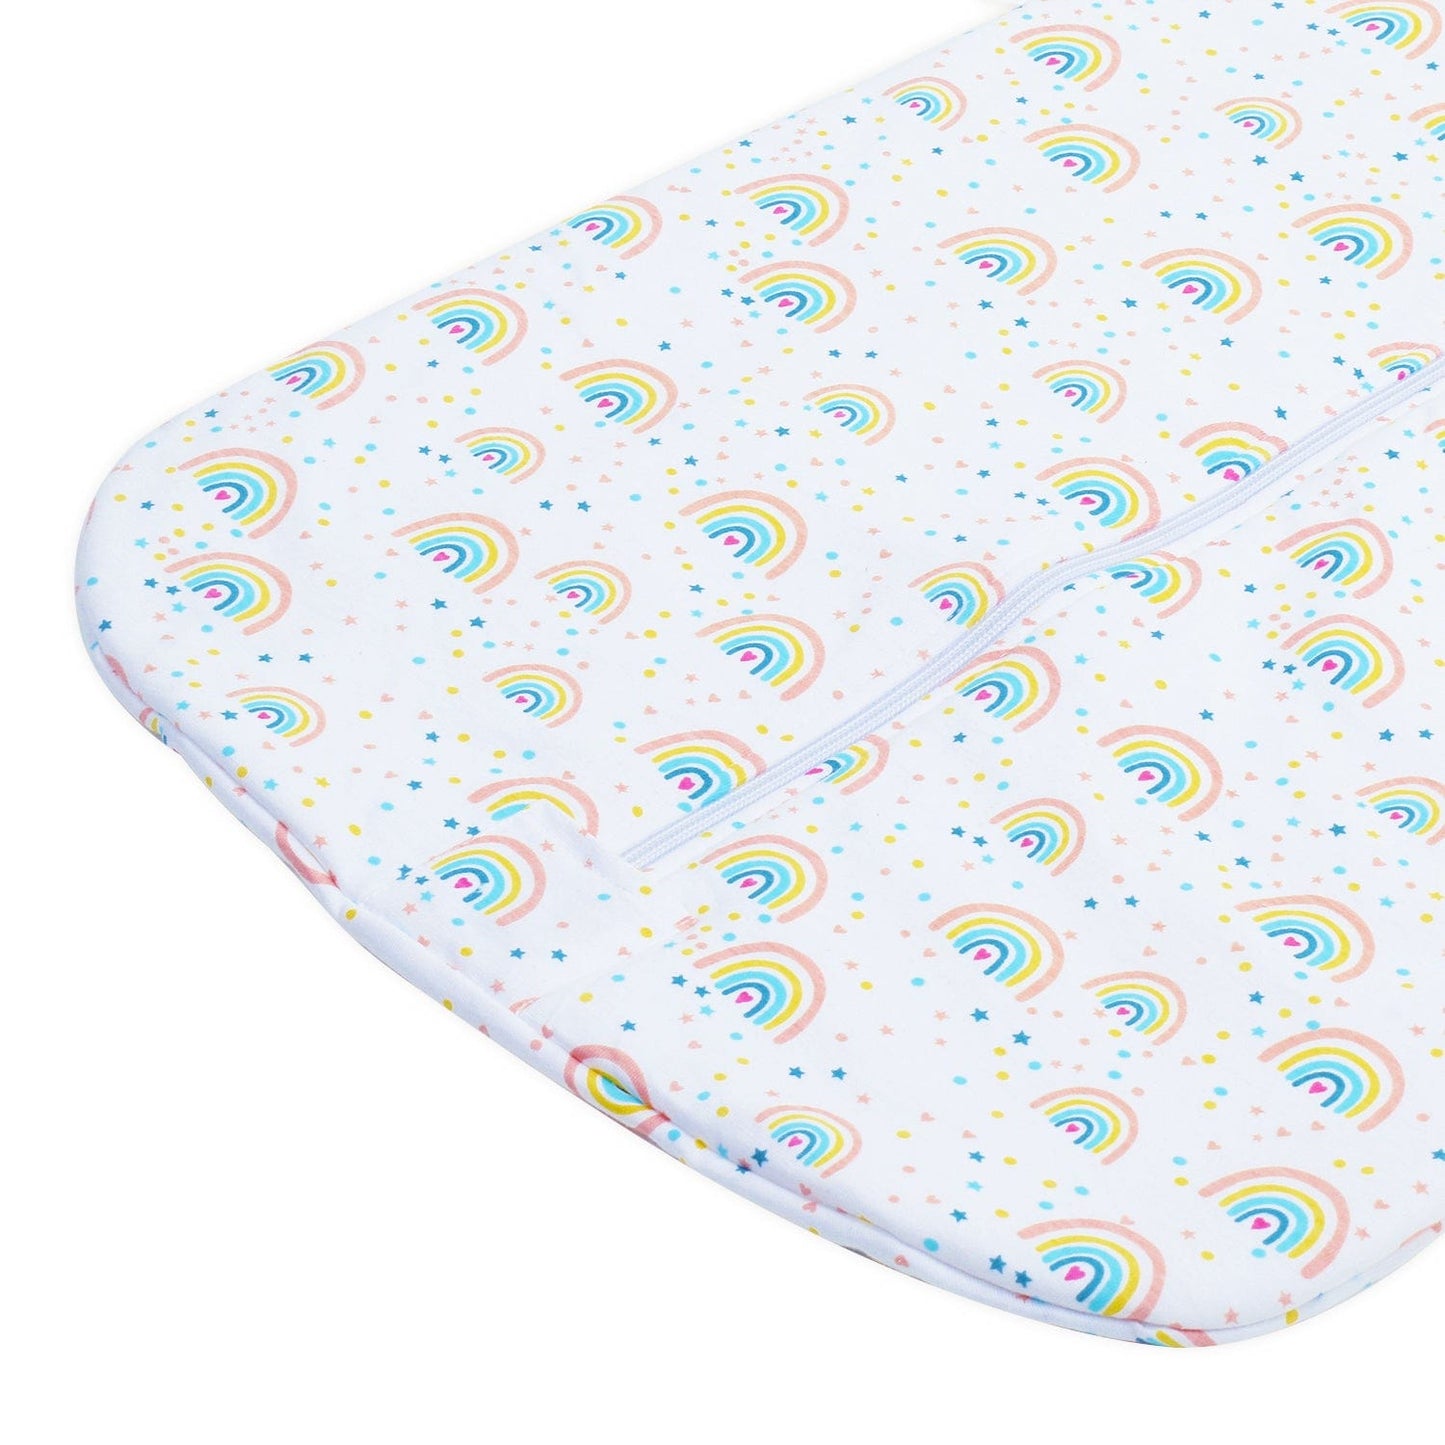 Dreamsack Cotton Sleep Sack, Quilted Layer, Size (6+ months), TOG 1.5, Rainbow